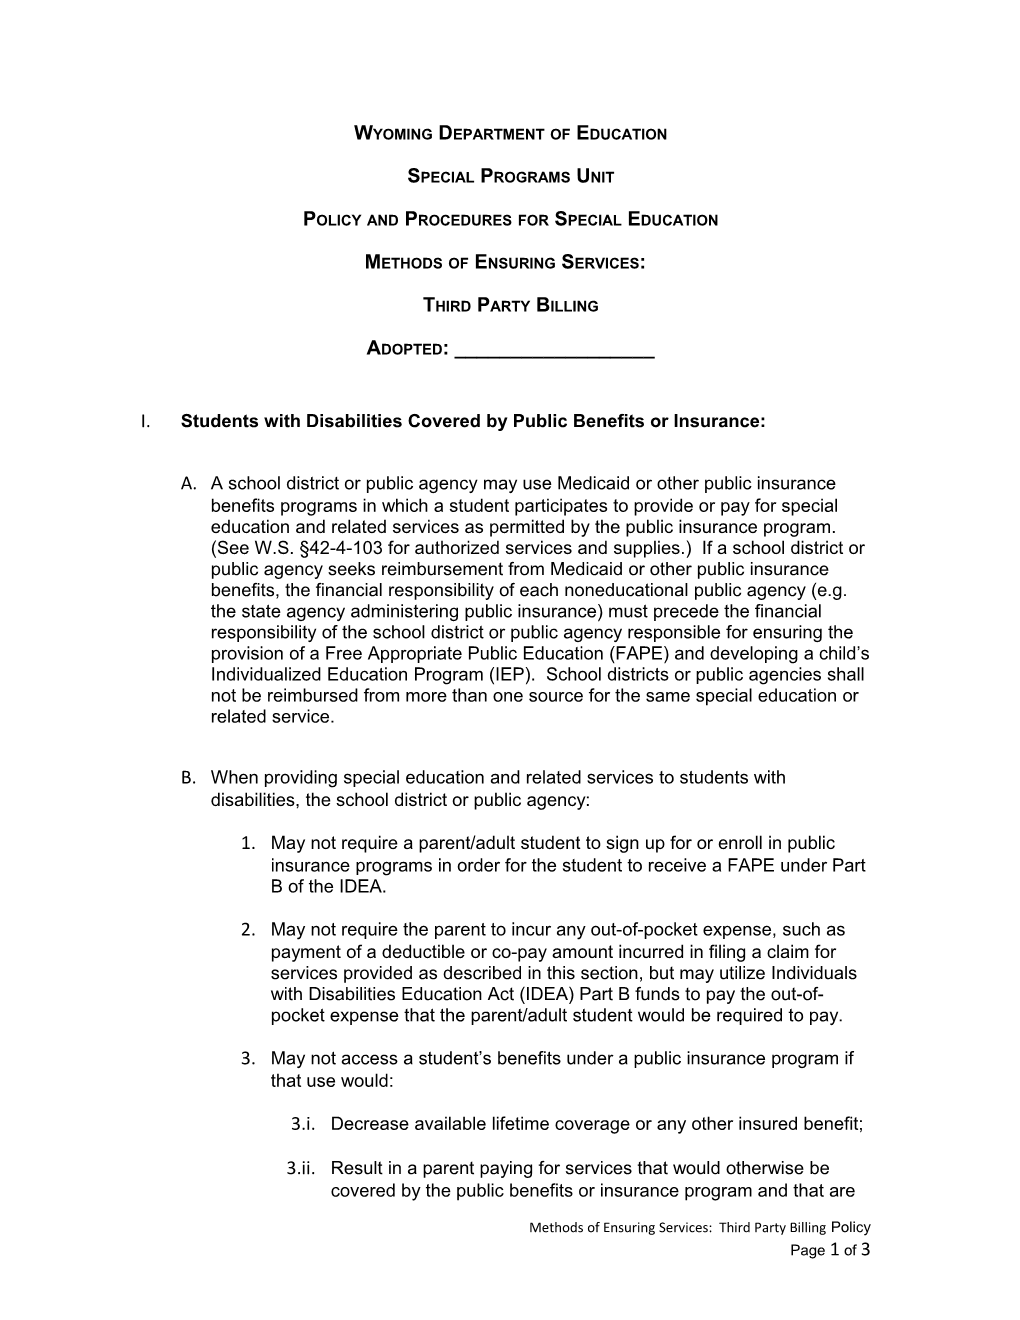 Policy and Procedures for Special Education